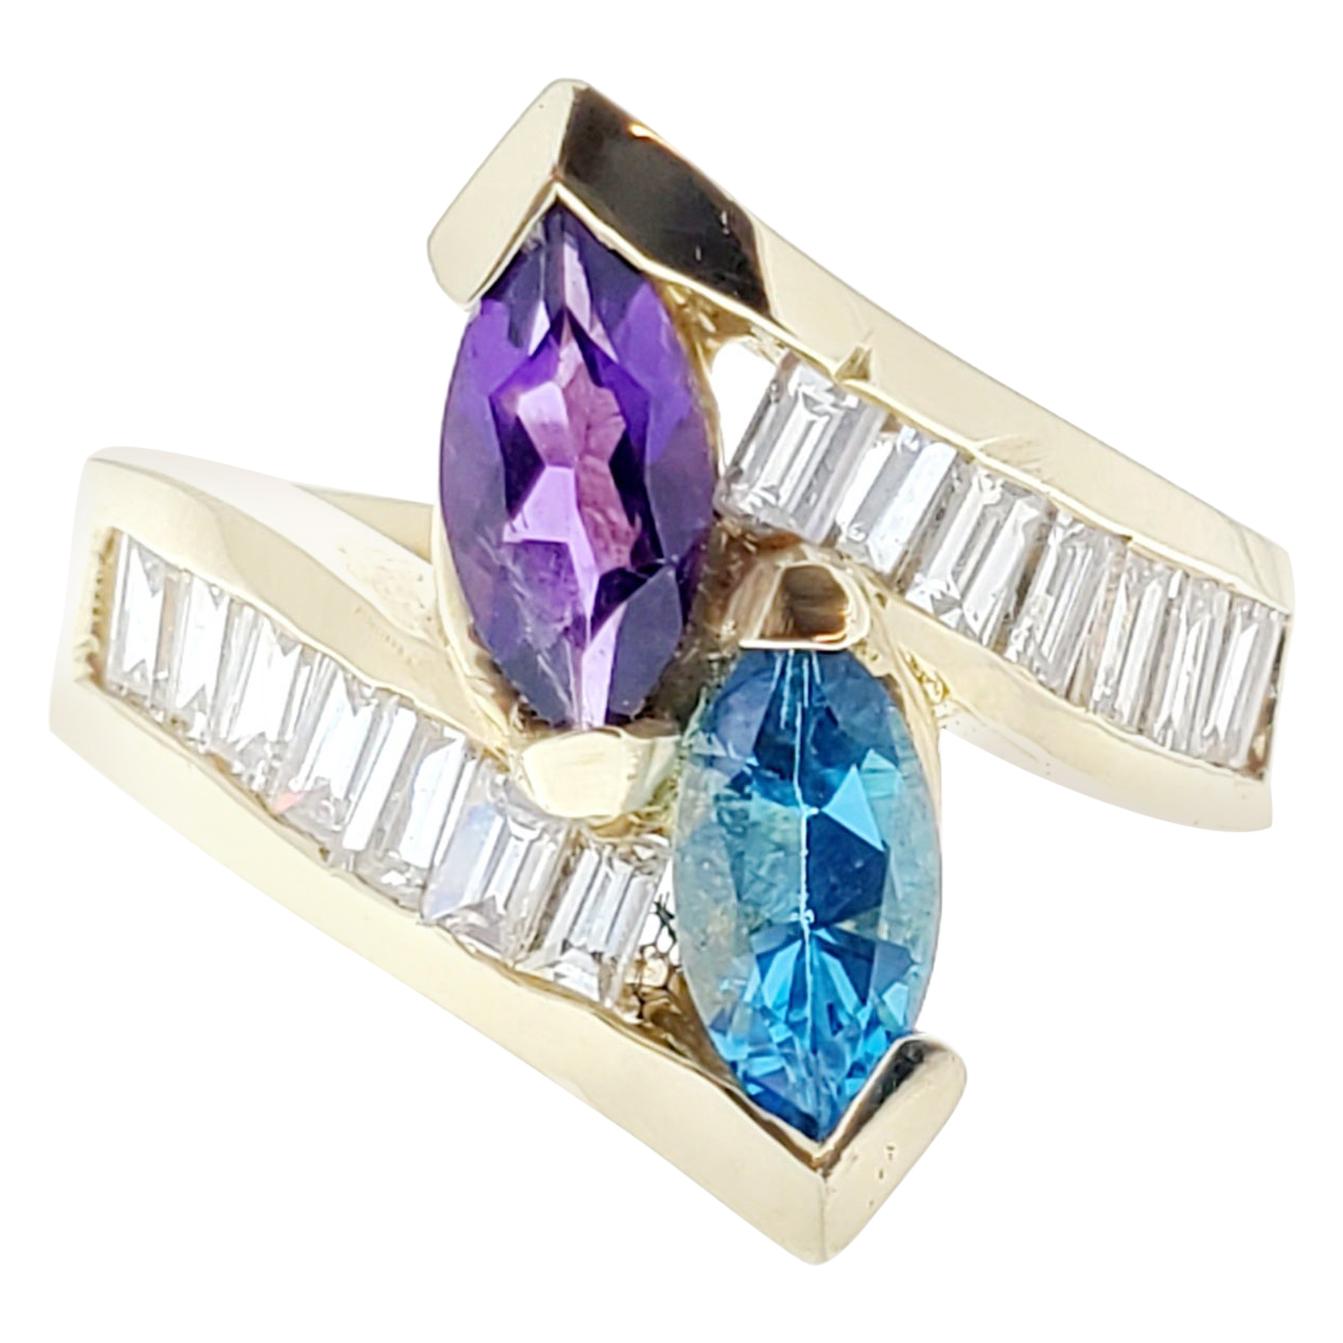 1.40 Carat Amethyst and Topaz and Diamond Cocktail Ring in 14 Karat Yellow Gold